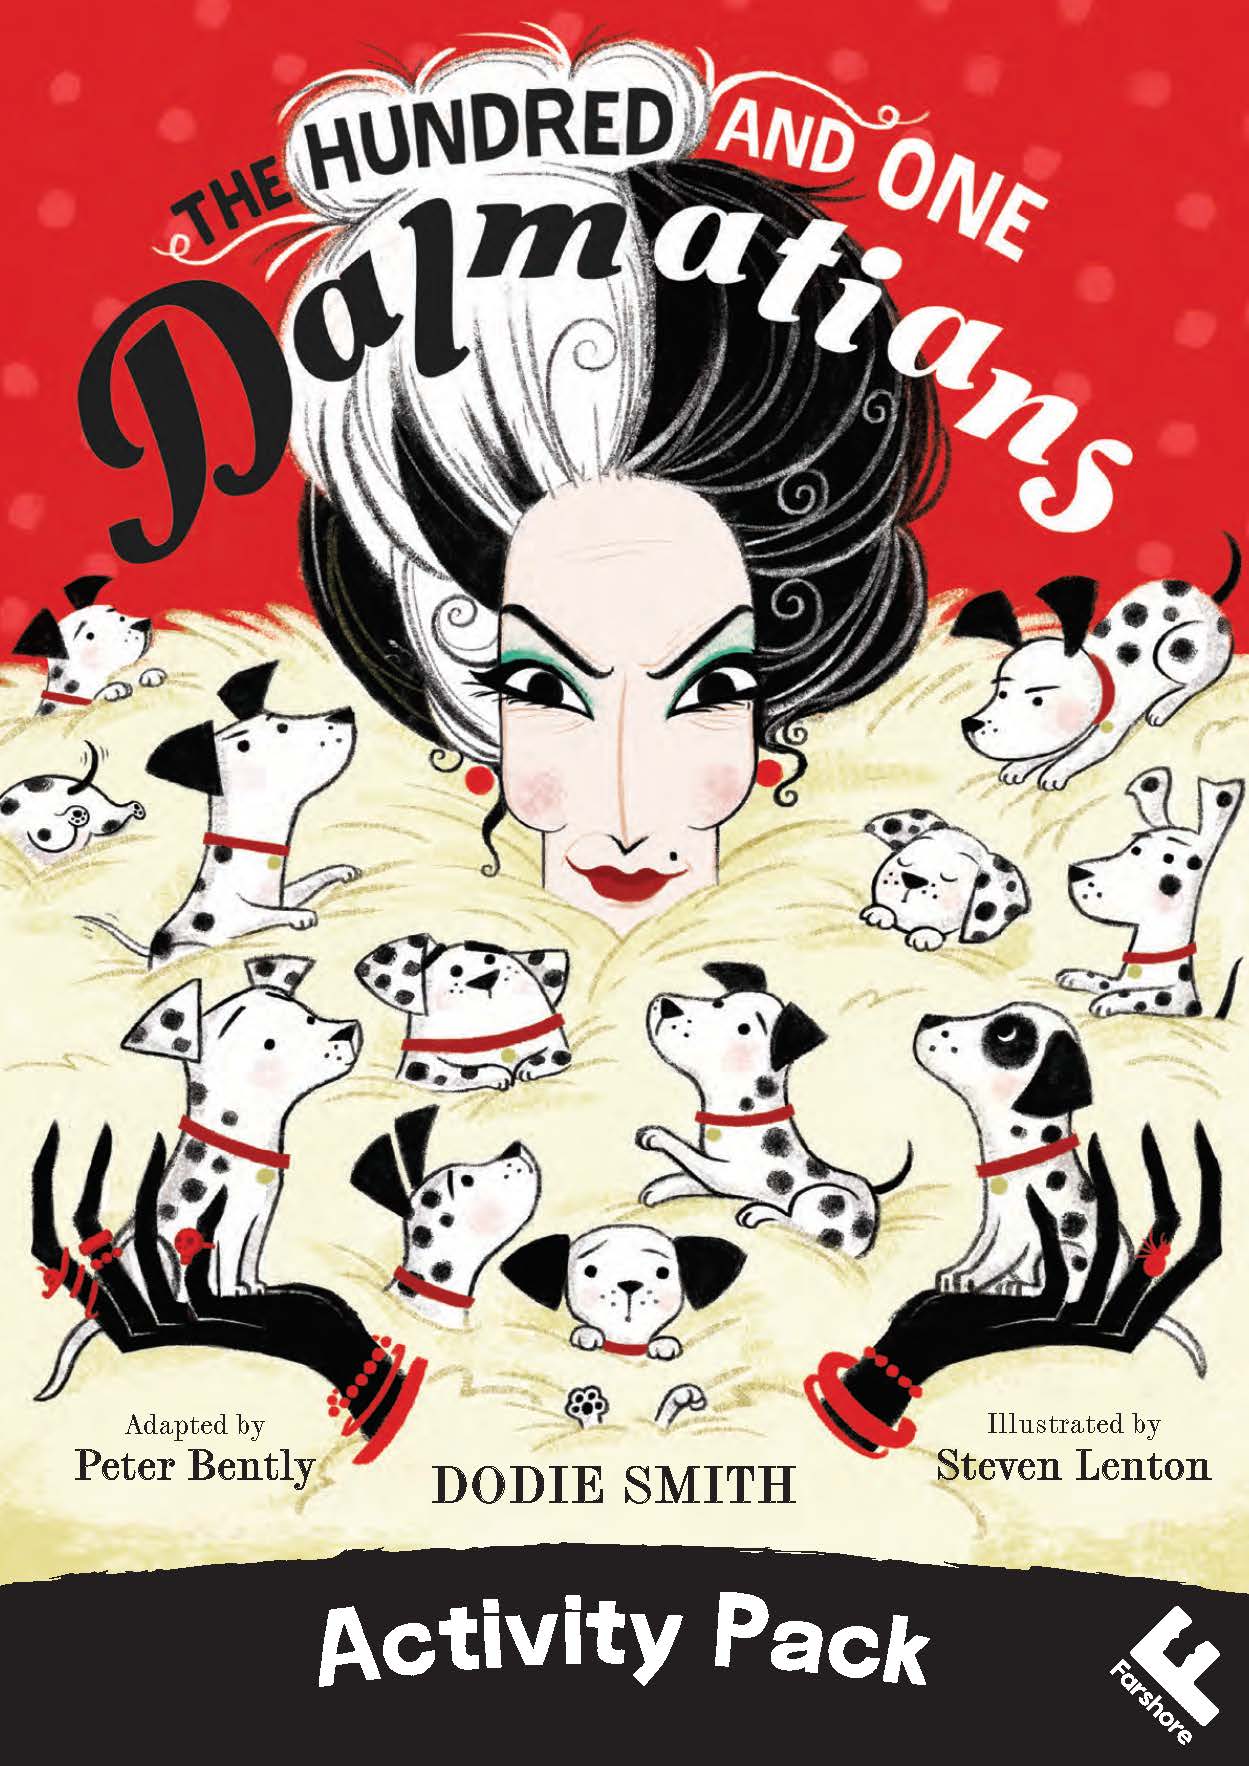 The Hundred and One Dalmatians Activity Sheet - 